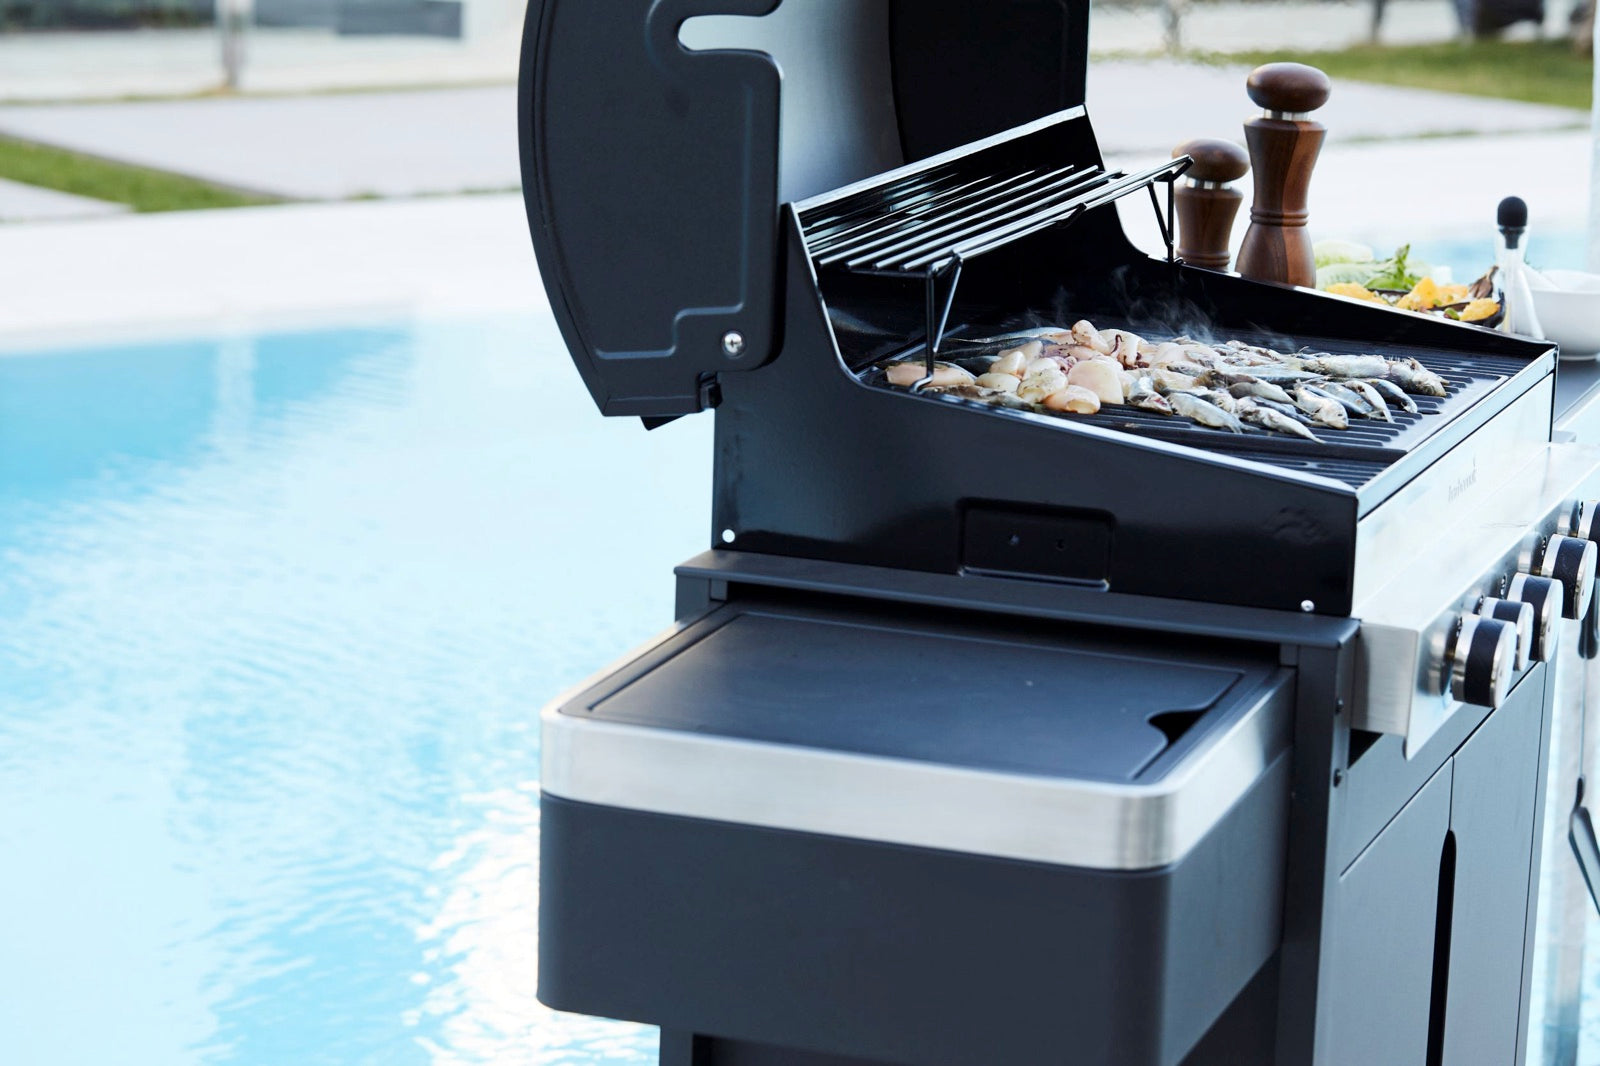 Start Your Summer With a Gas Grill Upgrade